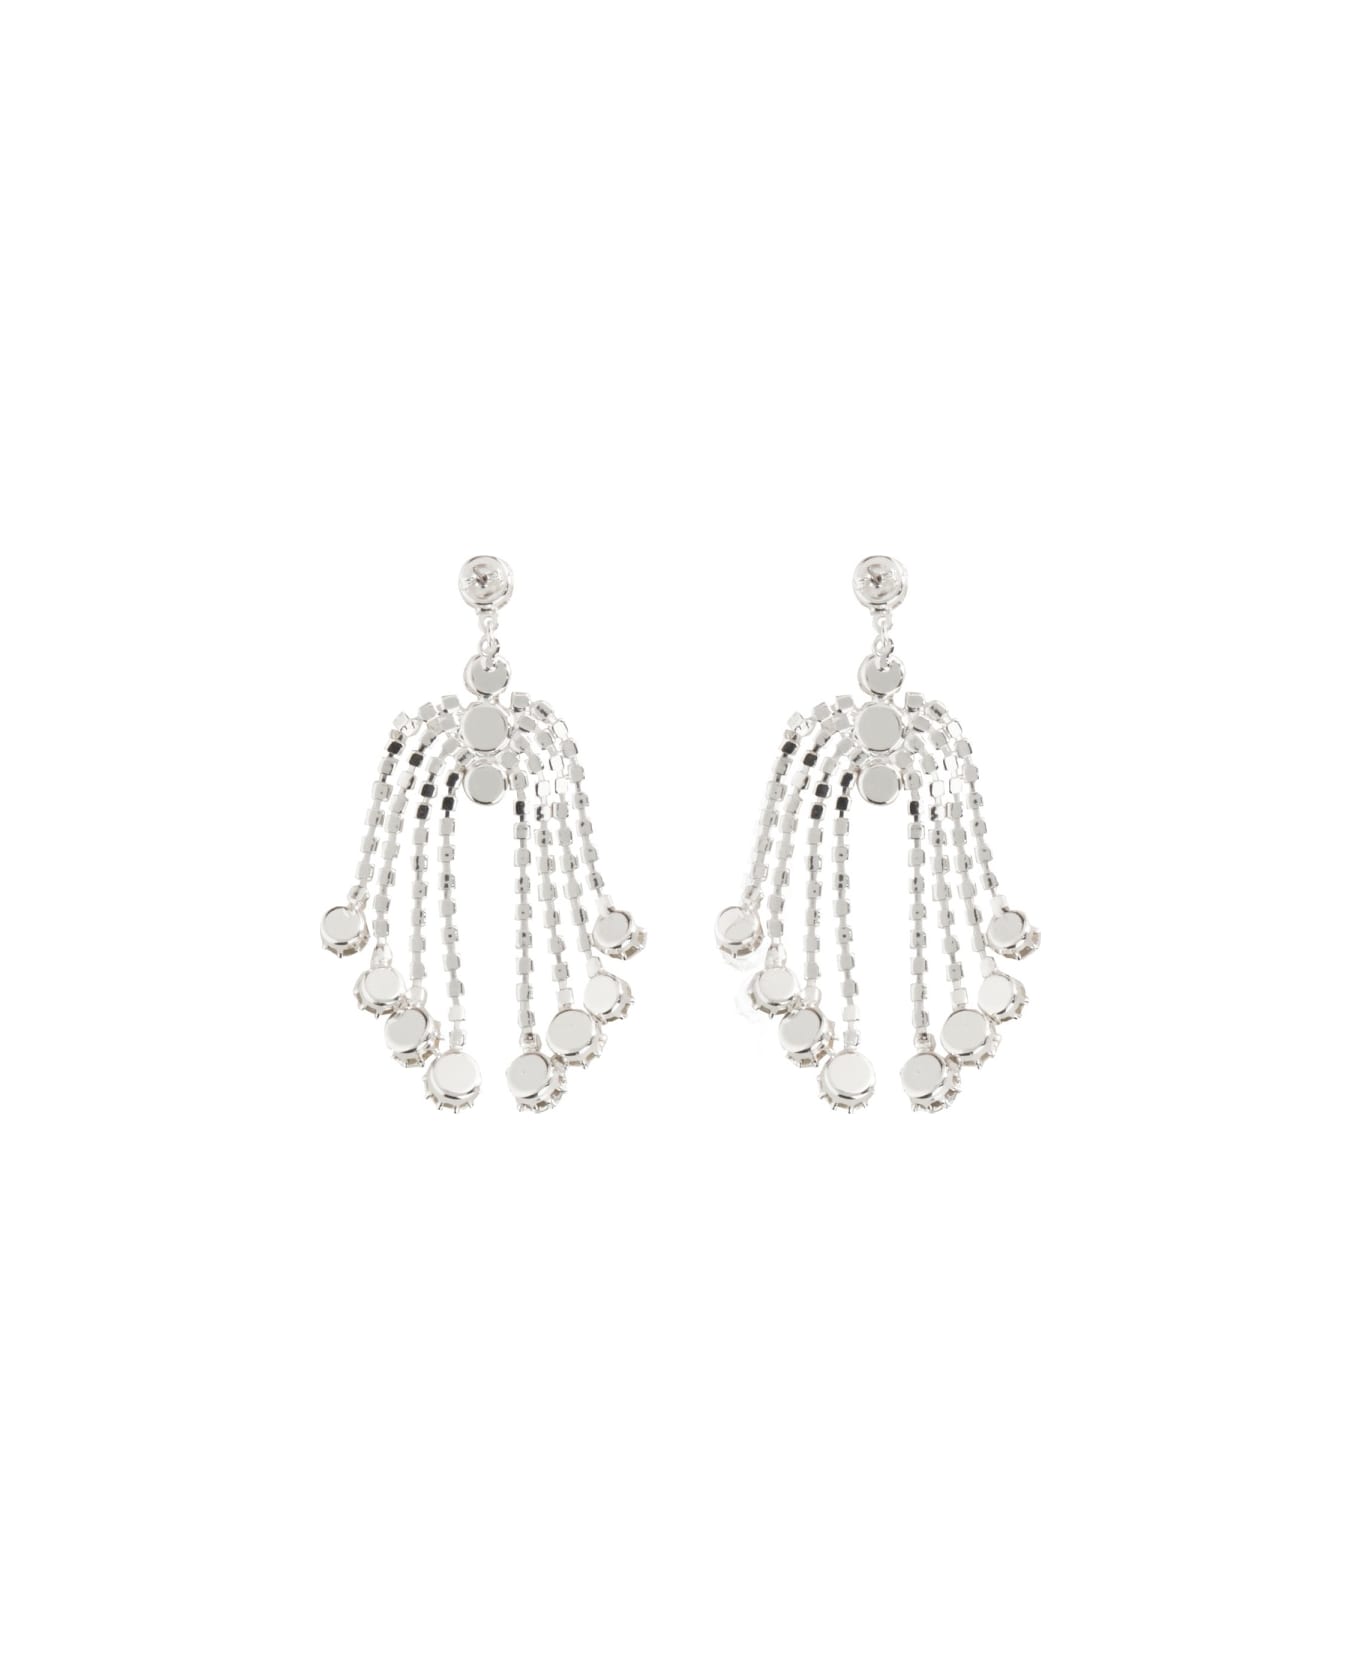 Magda Butrym Dangle Earrings With Crystals - SILVER